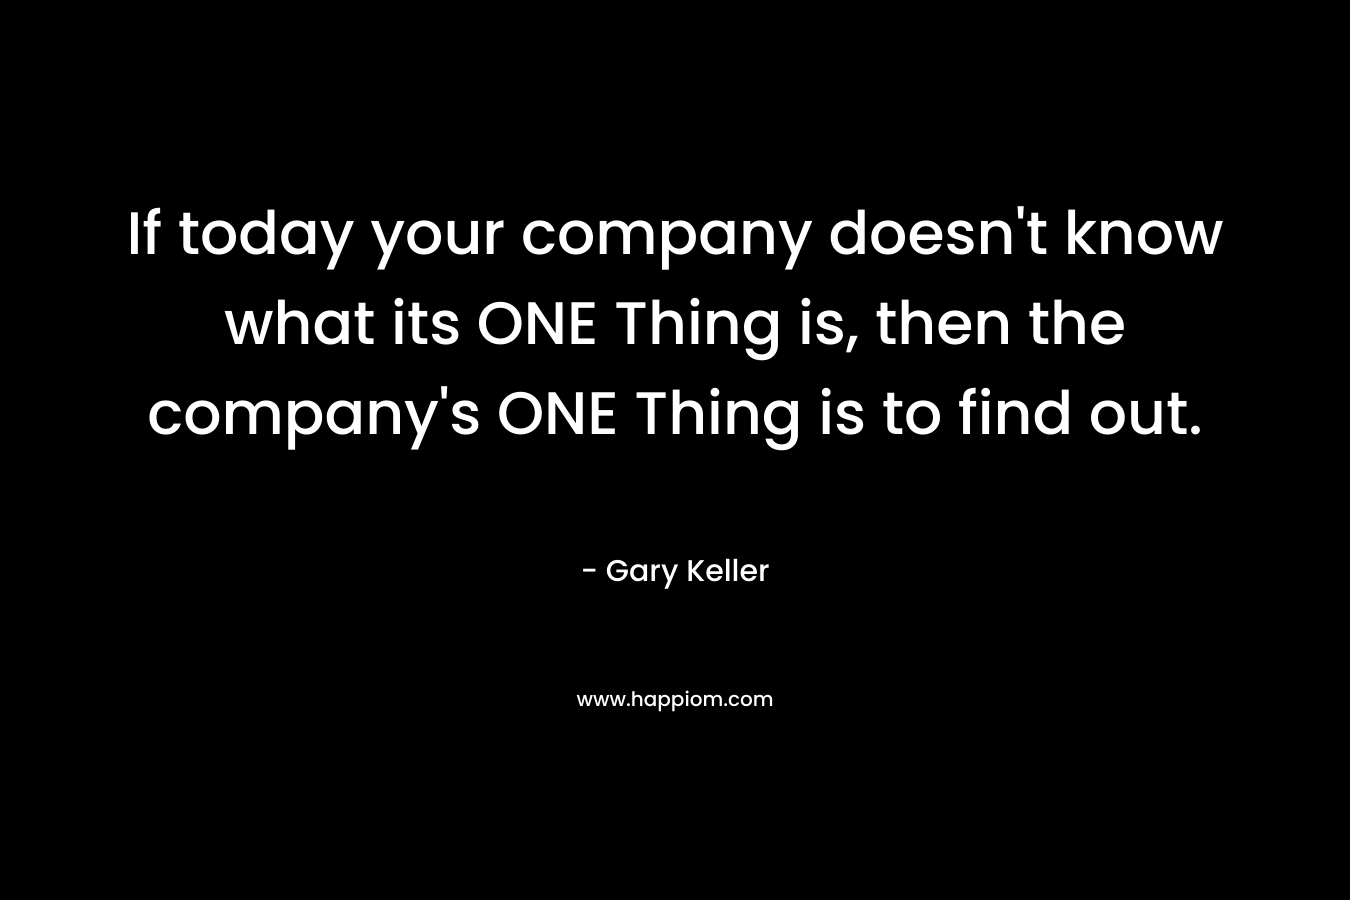 If today your company doesn’t know what its ONE Thing is, then the company’s ONE Thing is to find out. – Gary Keller